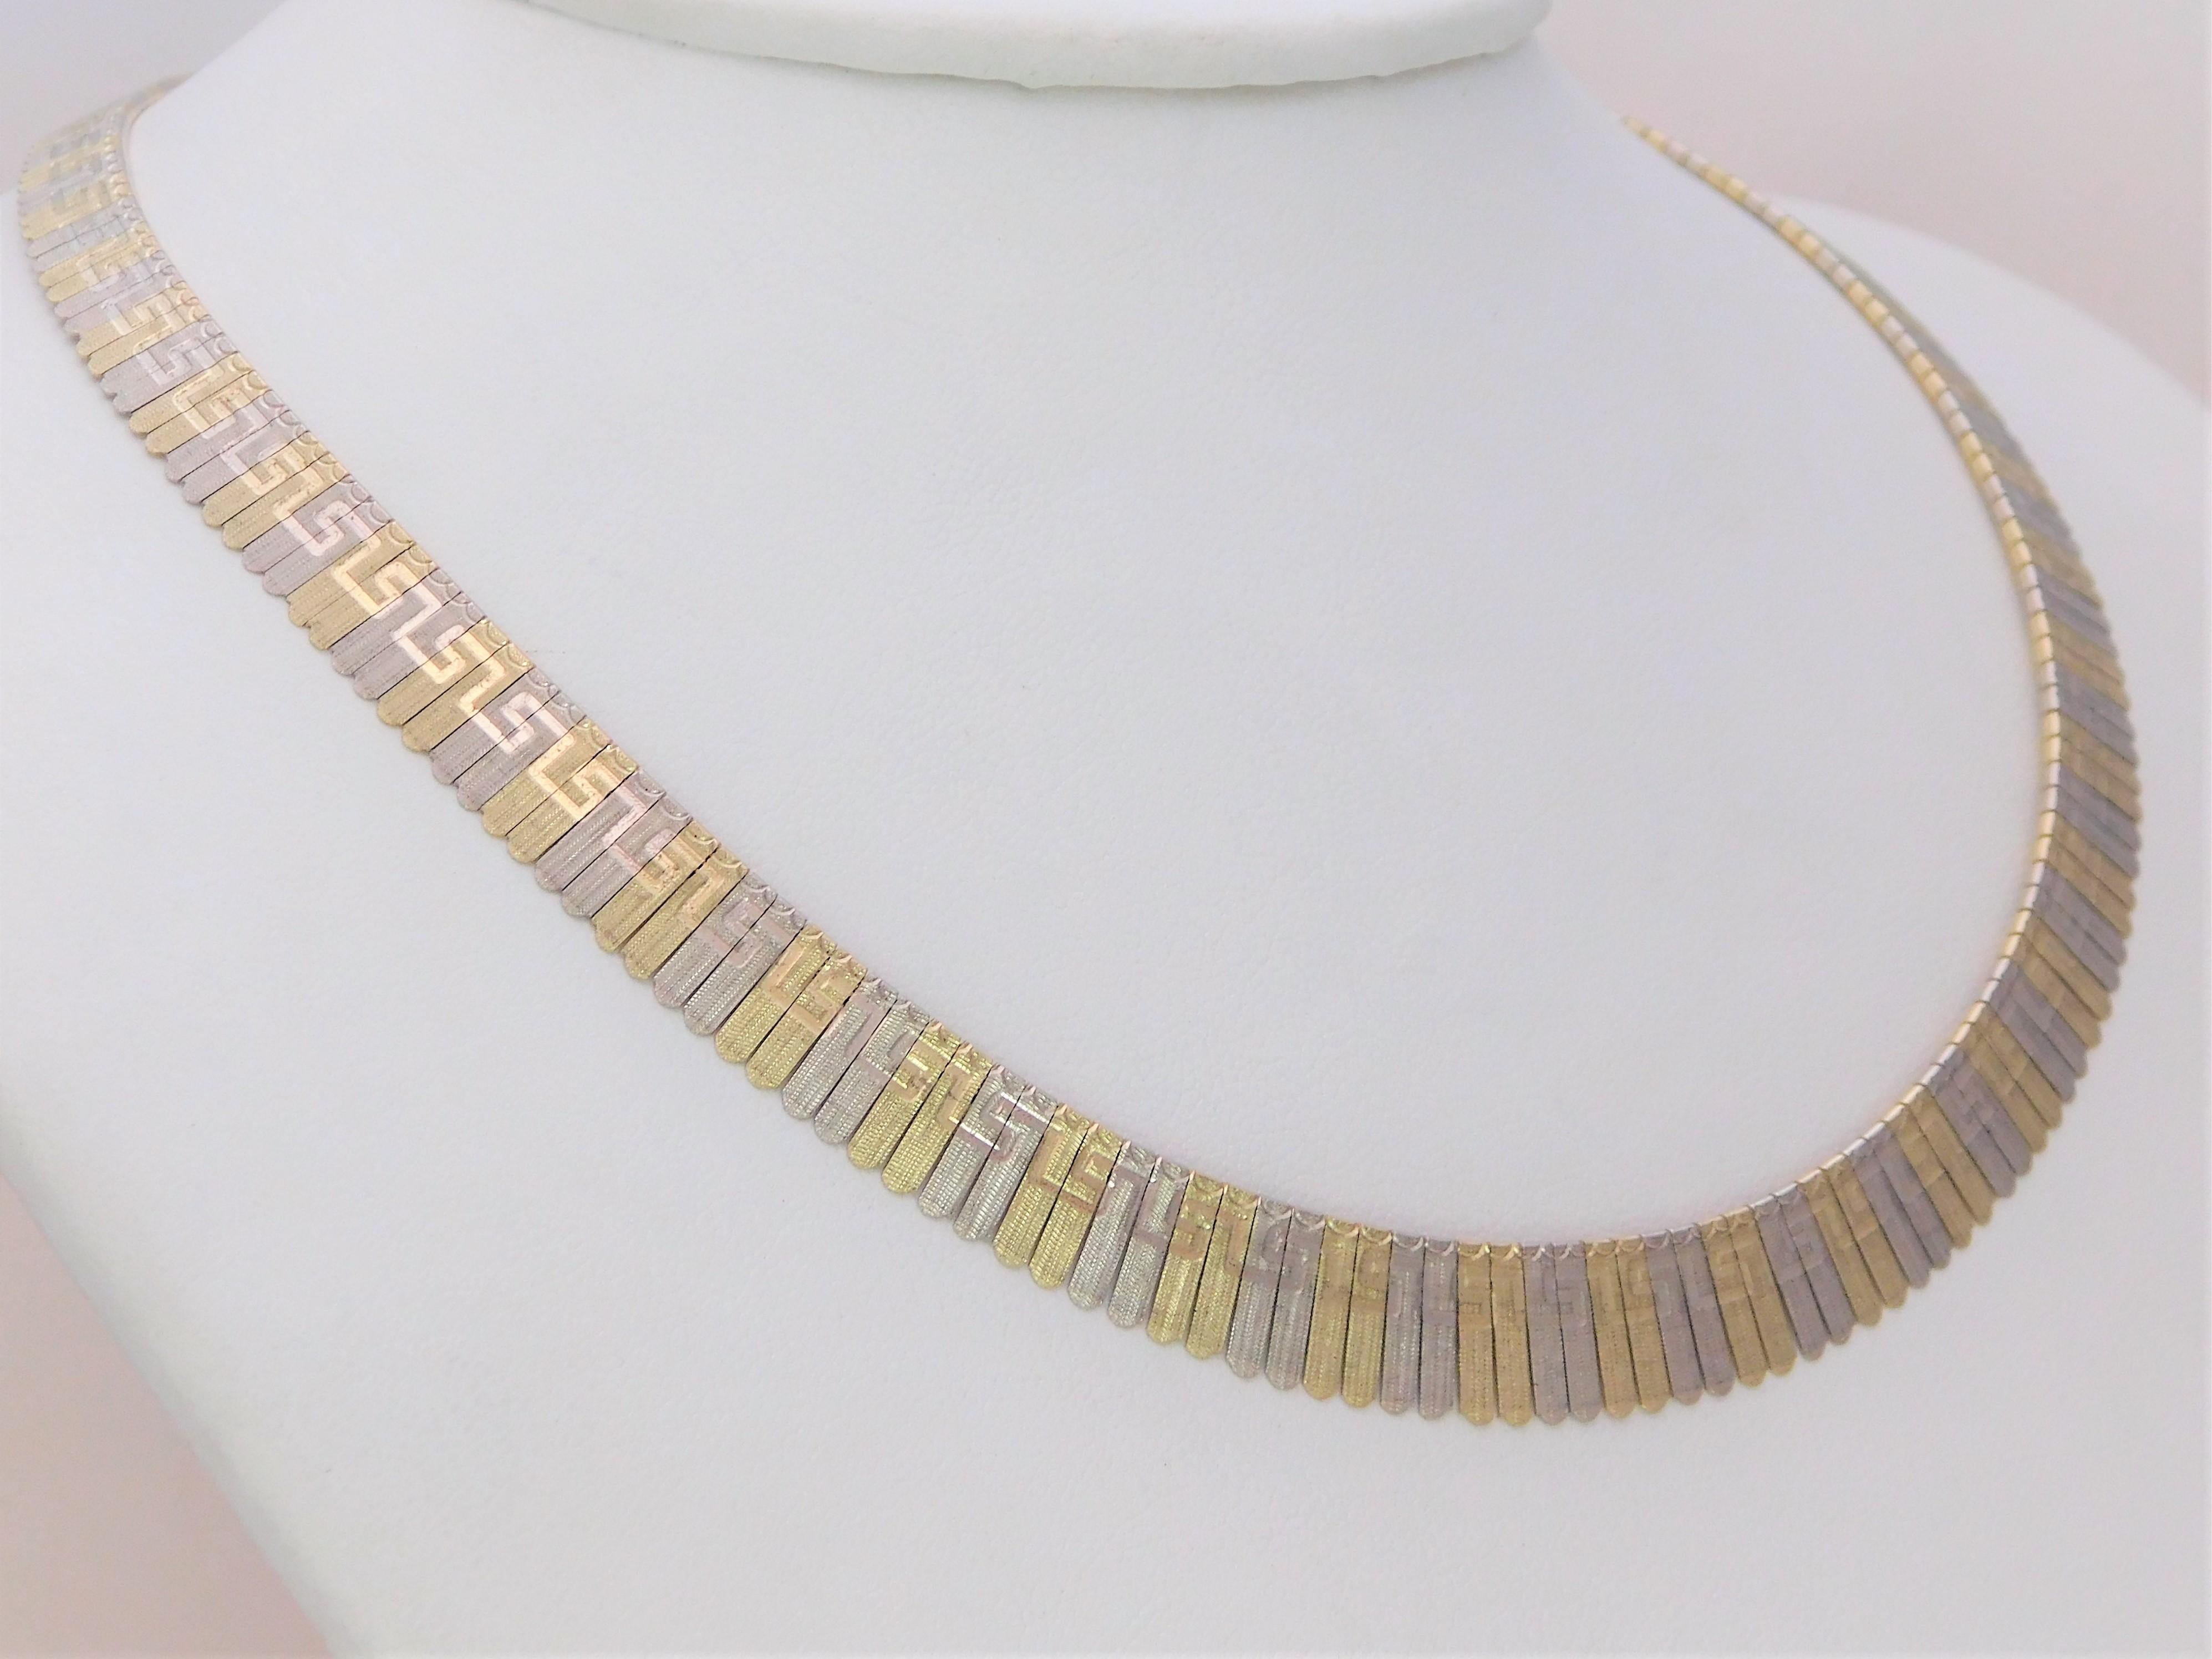 Vintage Italian 14 Karat Gold Feather Necklace In Excellent Condition For Sale In Metairie, LA